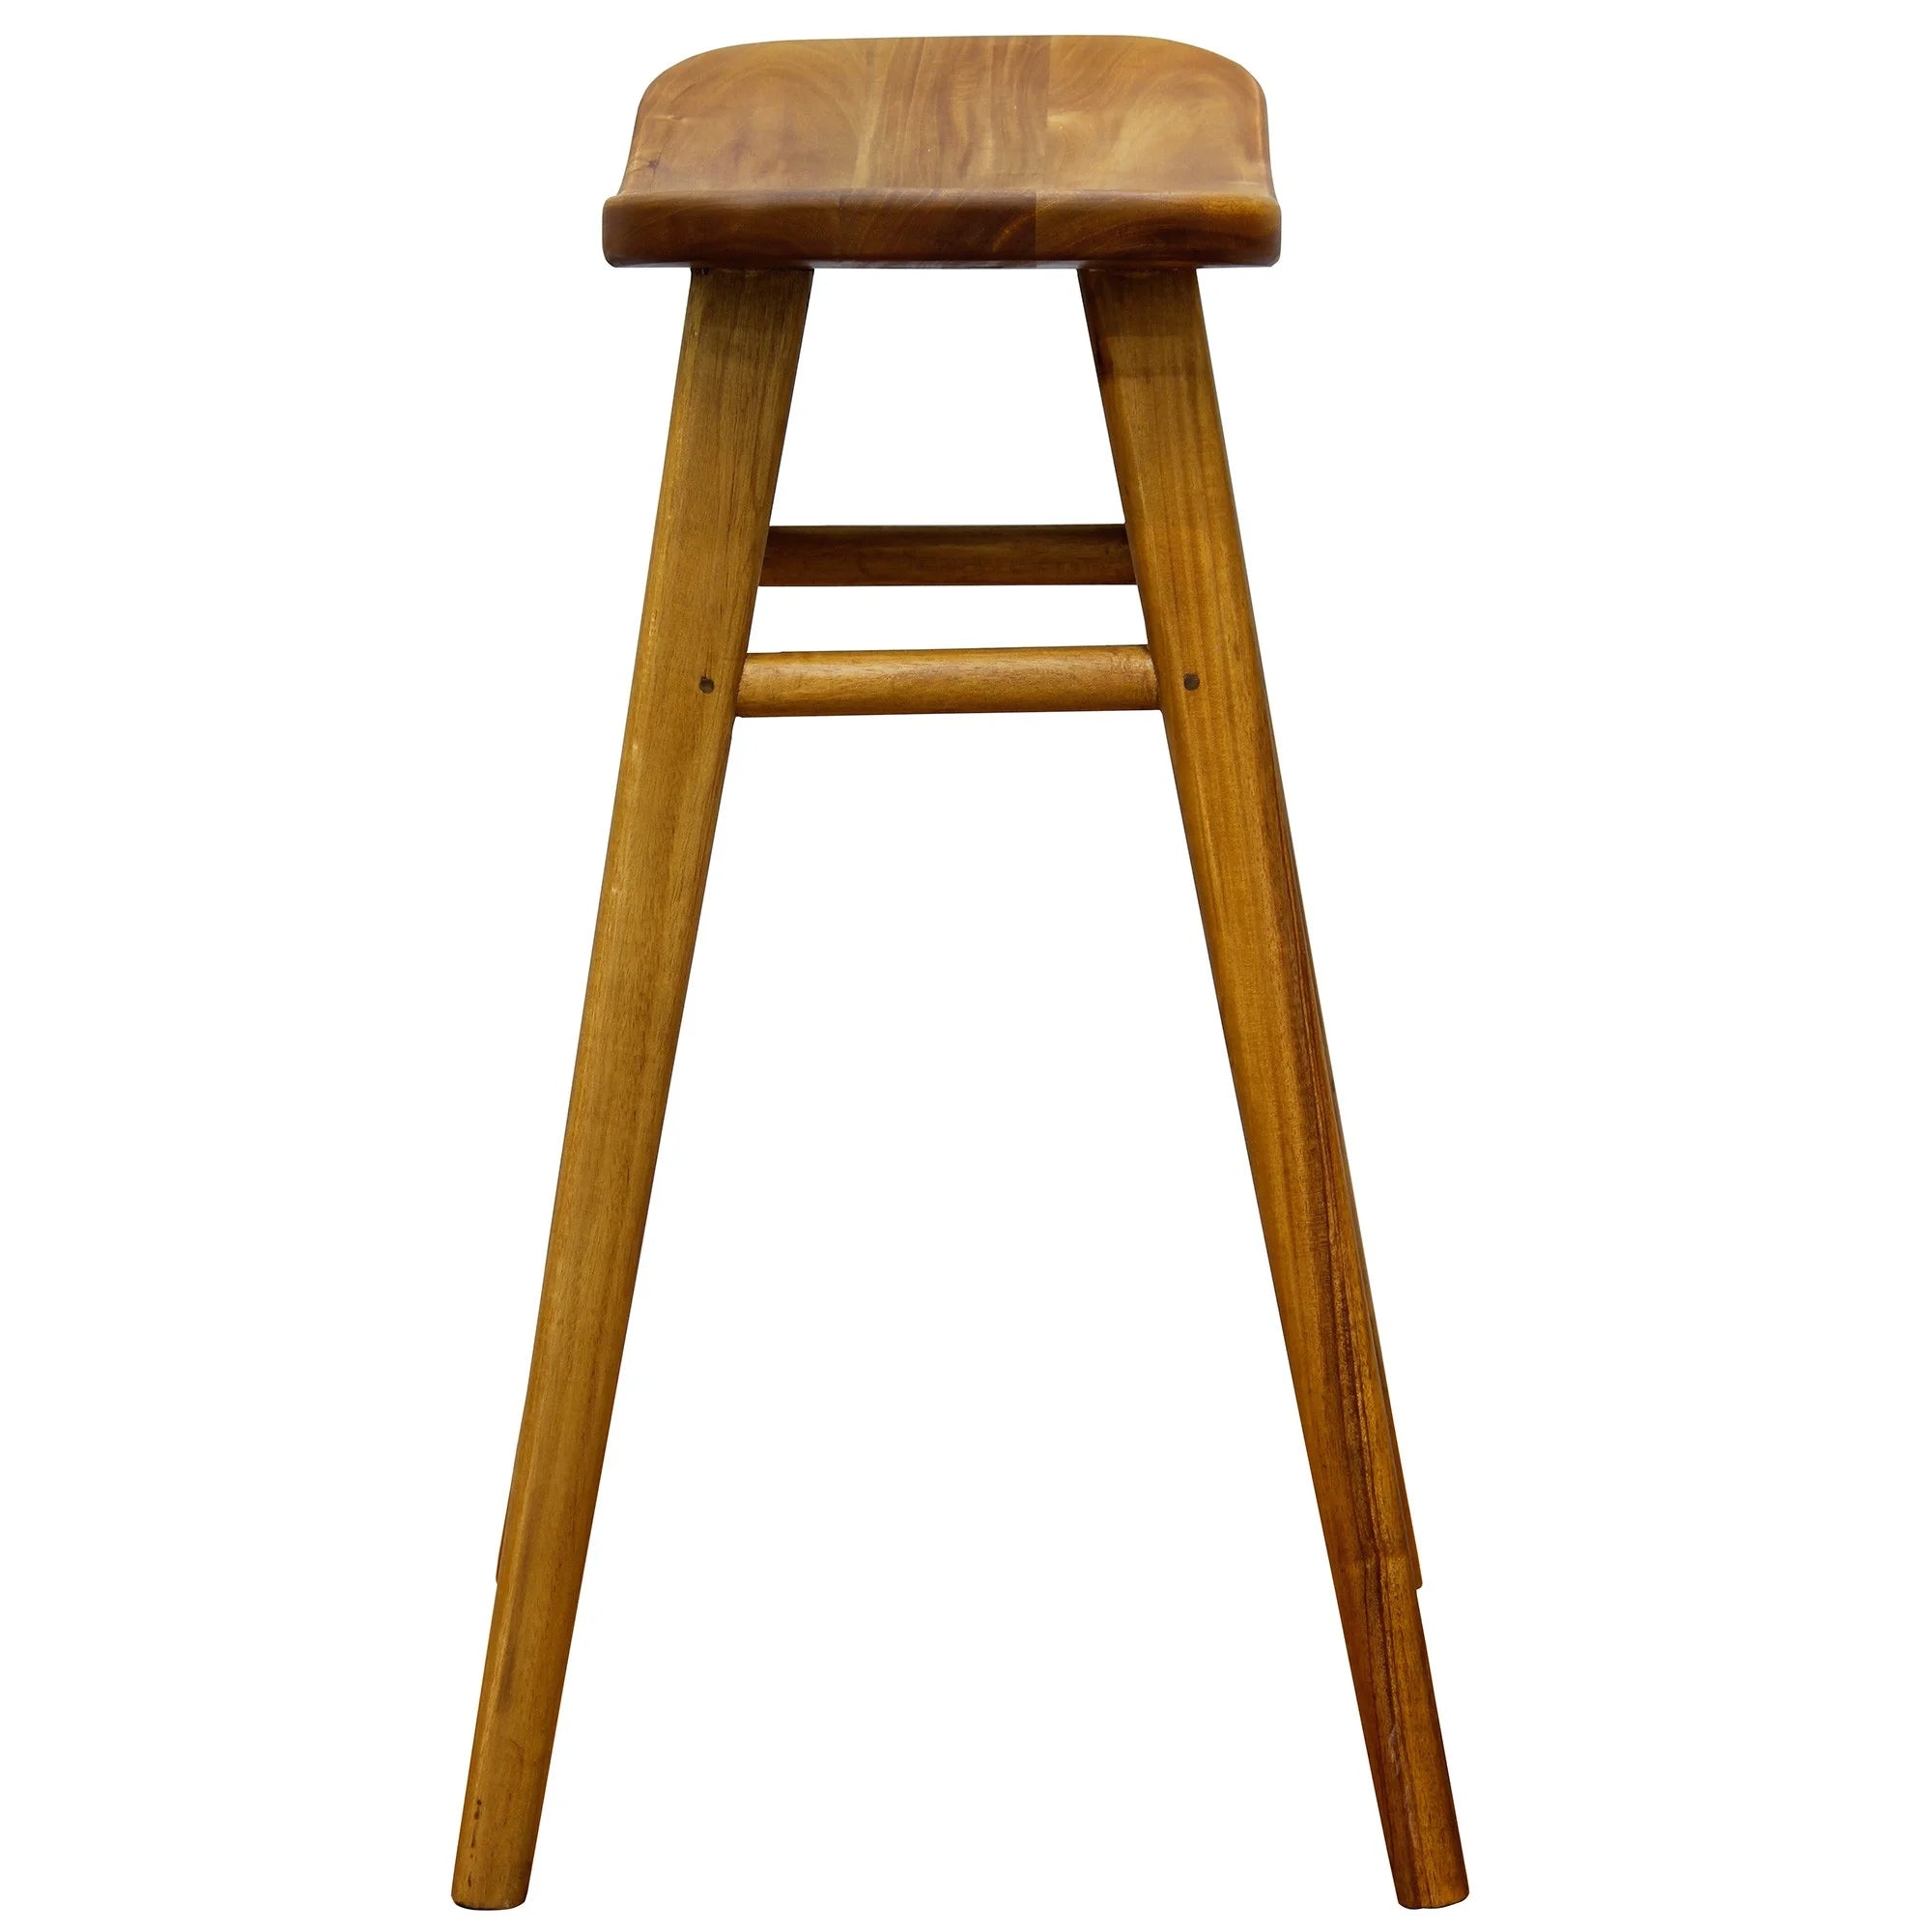 Aria Oval Solid Timber Counter Stool - Caramel - Notbrand